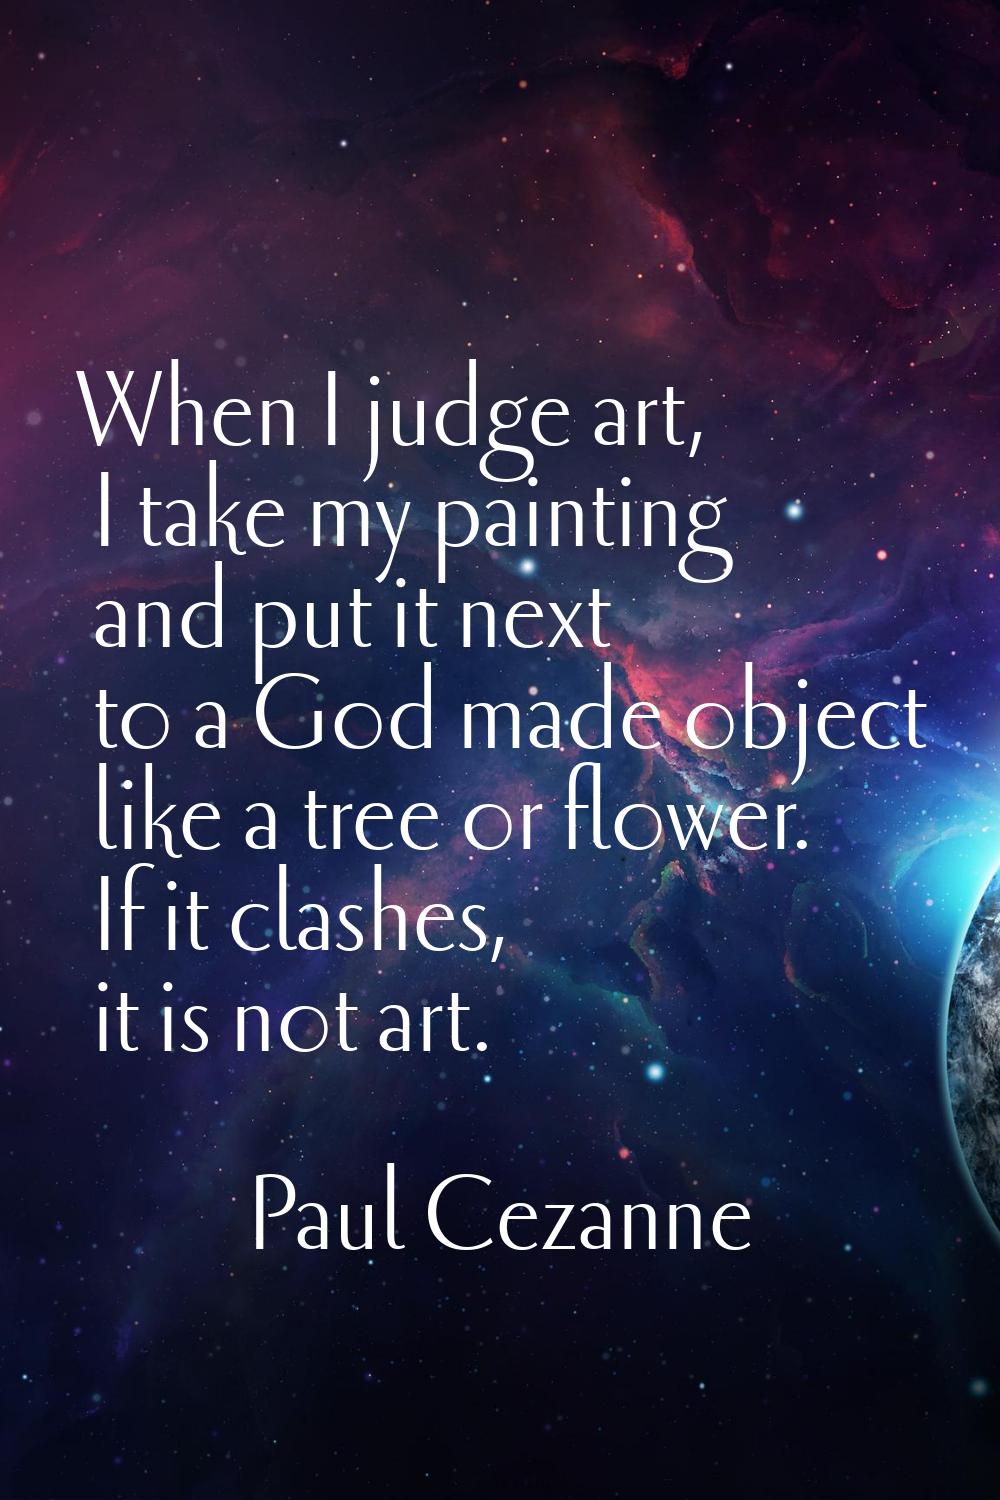 When I judge art, I take my painting and put it next to a God made object like a tree or flower. If